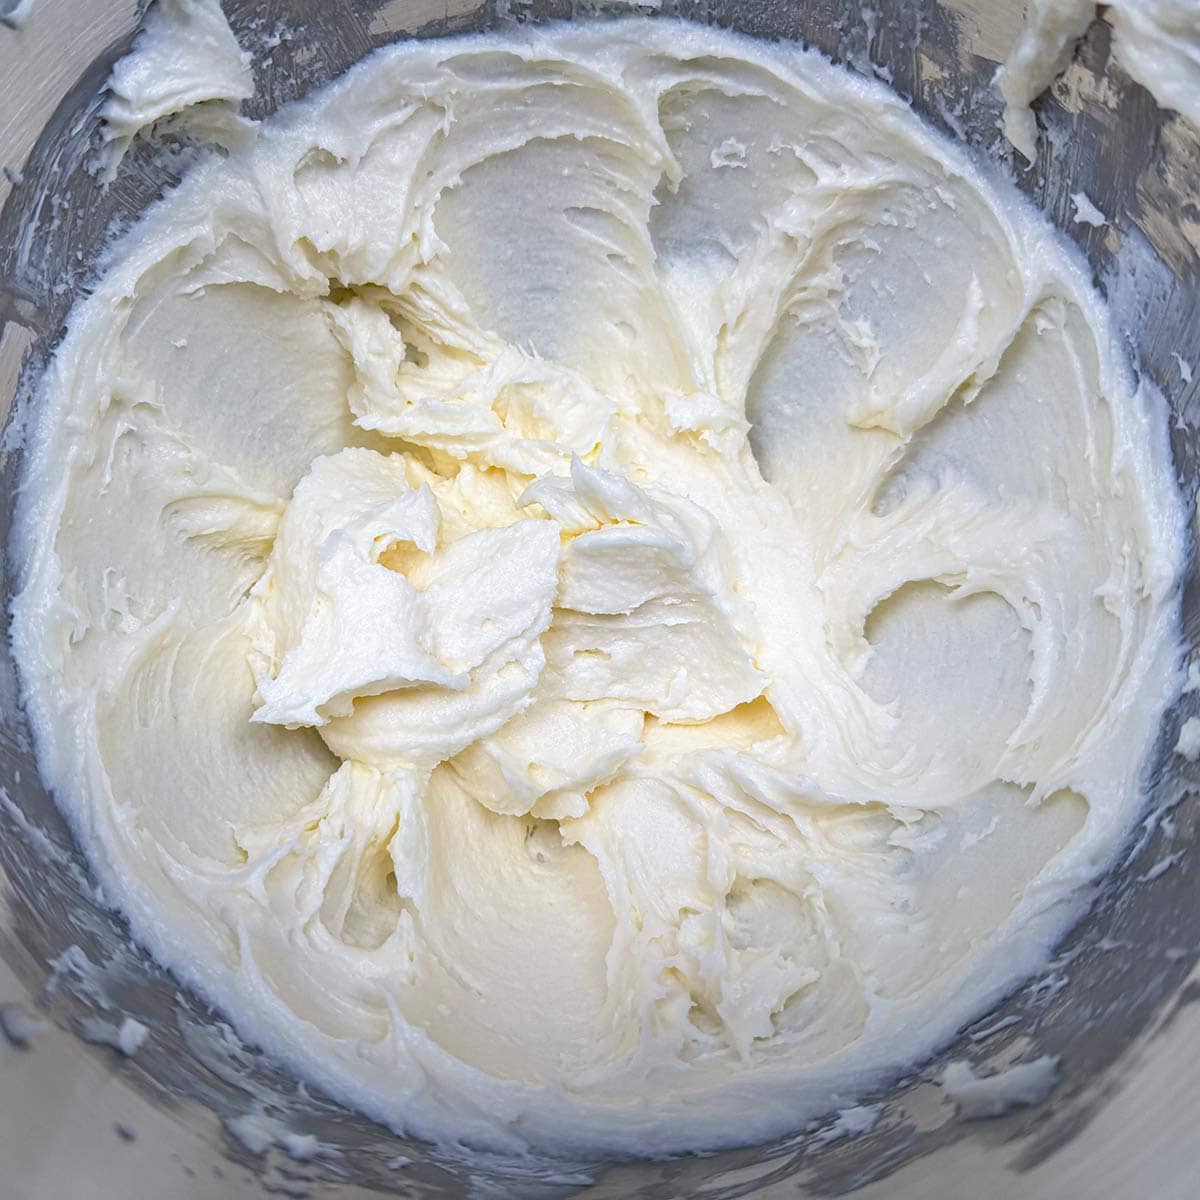 Creamy looking butter, cream cheese, and sugar, in a mixer bowl.